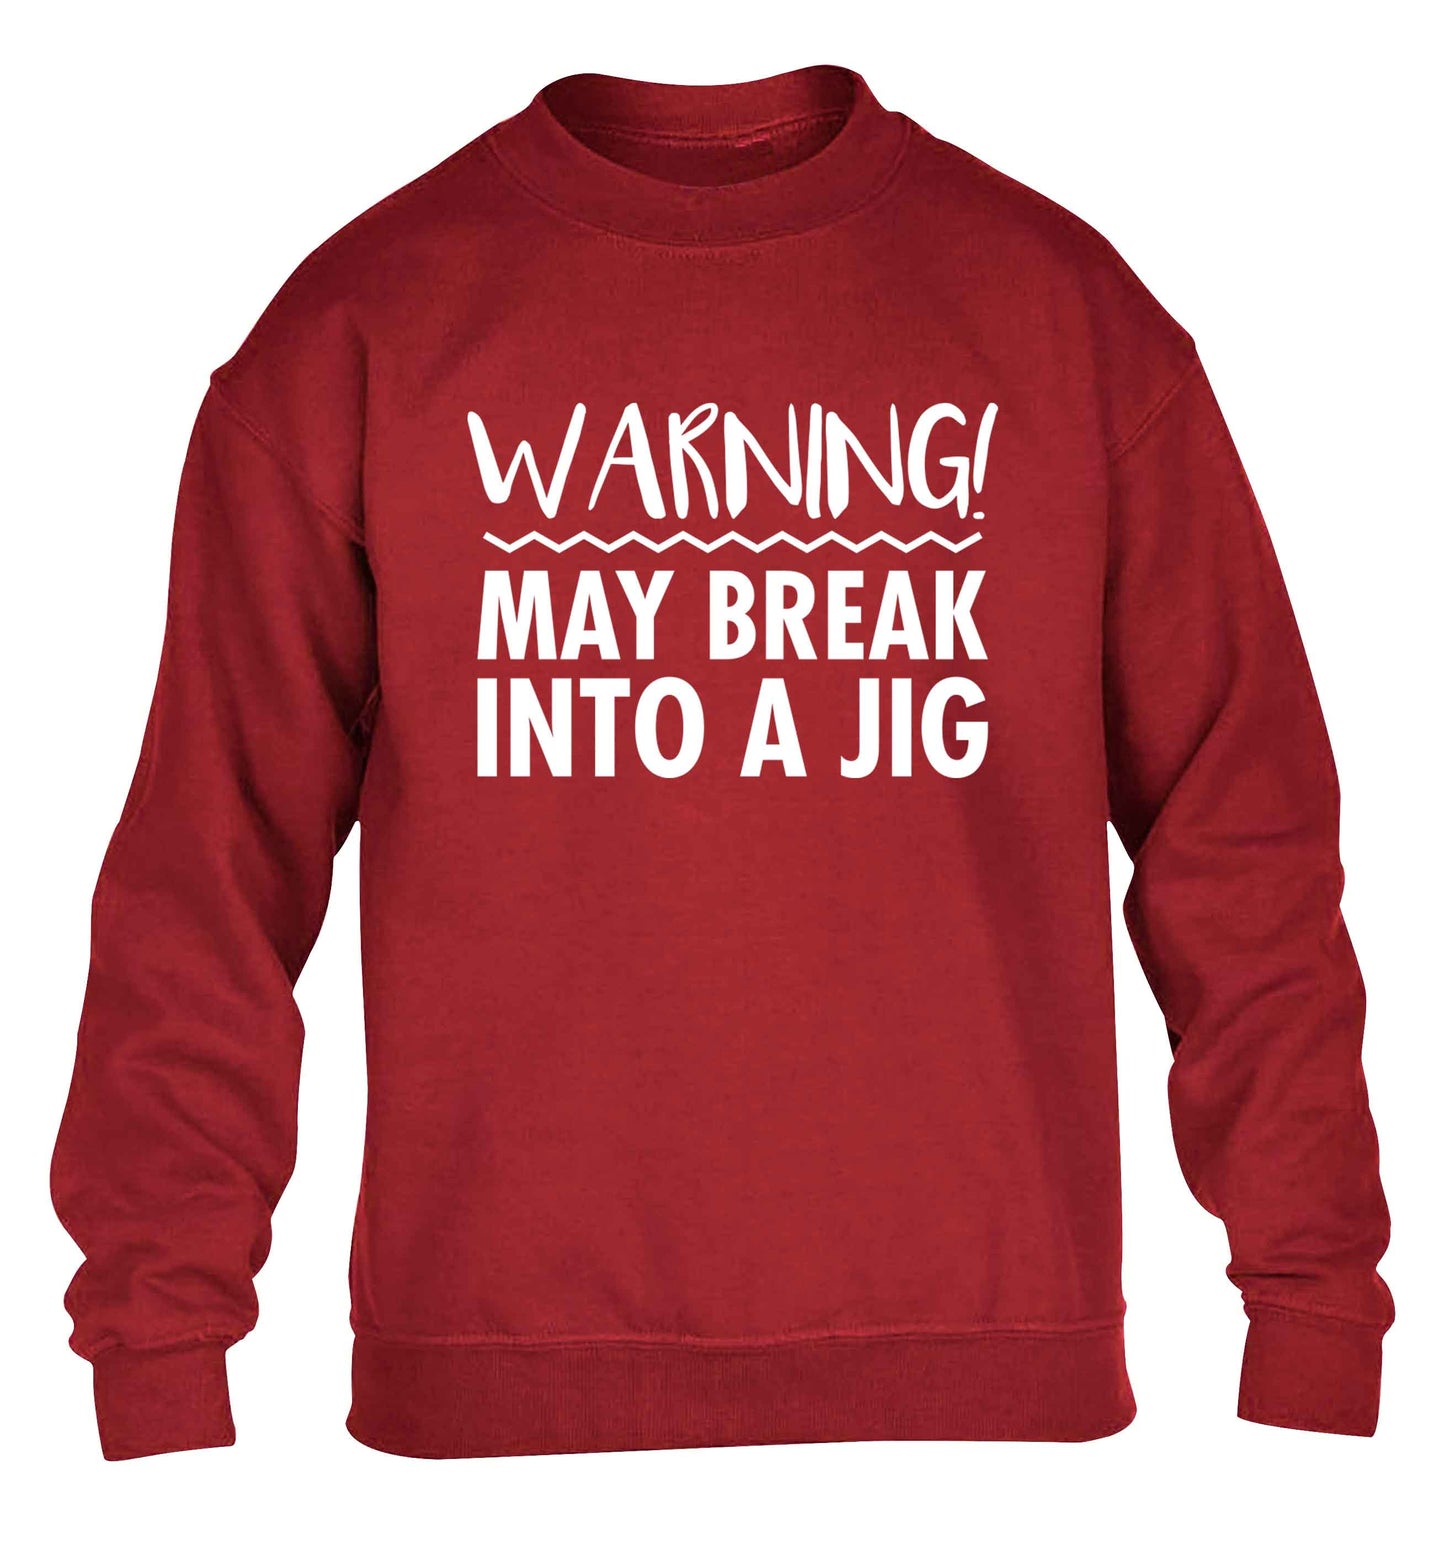 Warning may break into a jig children's grey sweater 12-13 Years